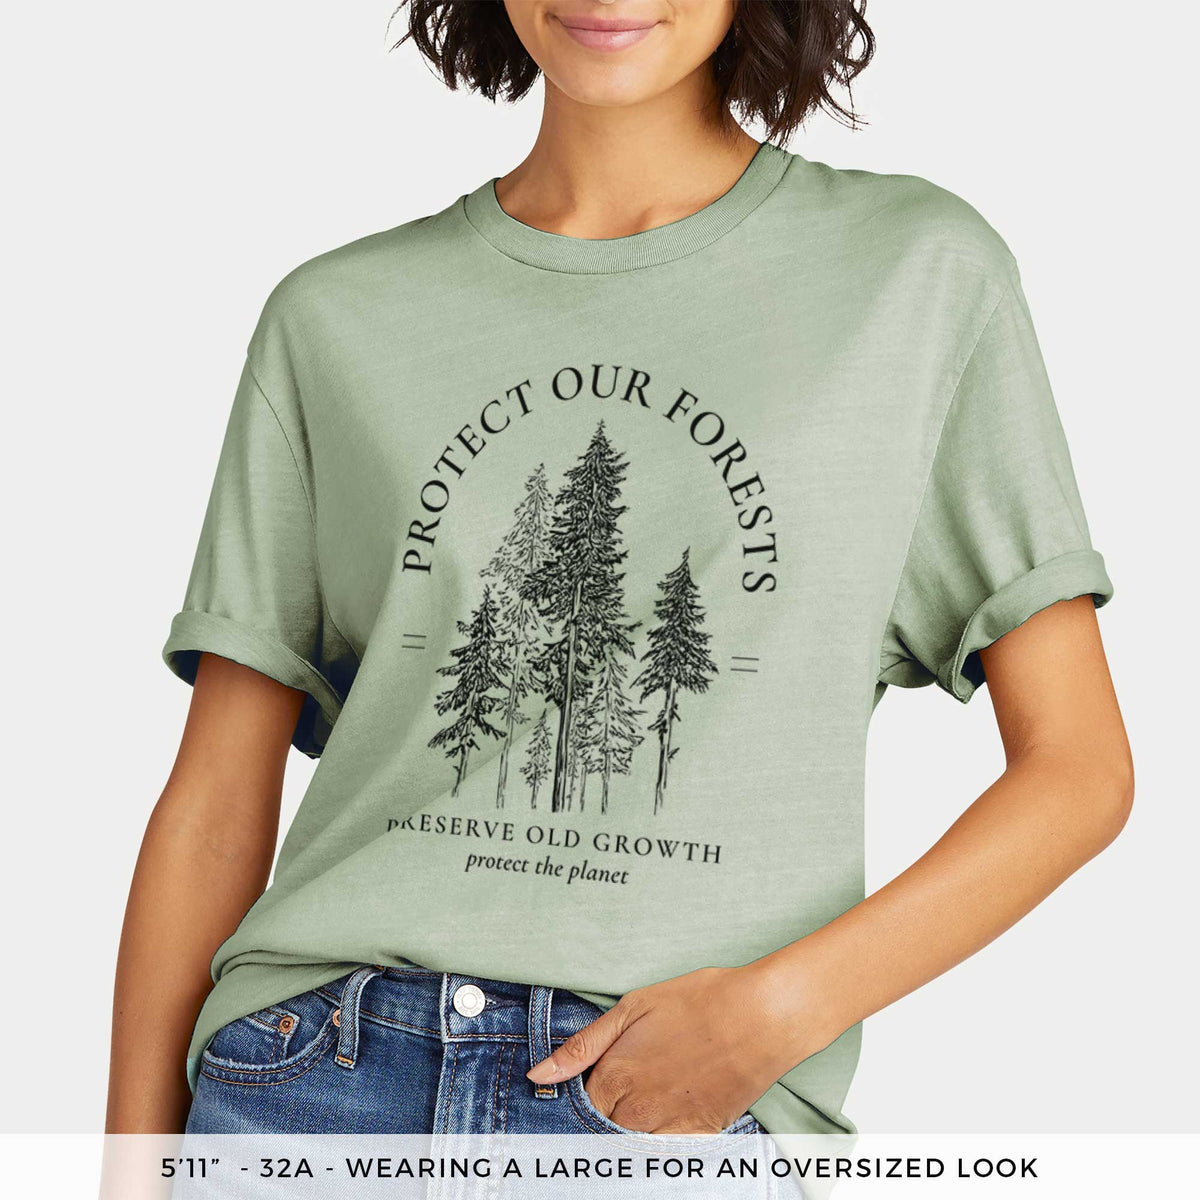 Protect our Forests - Preserve Old Growth -  Mineral Wash 100% Organic Cotton Short Sleeve